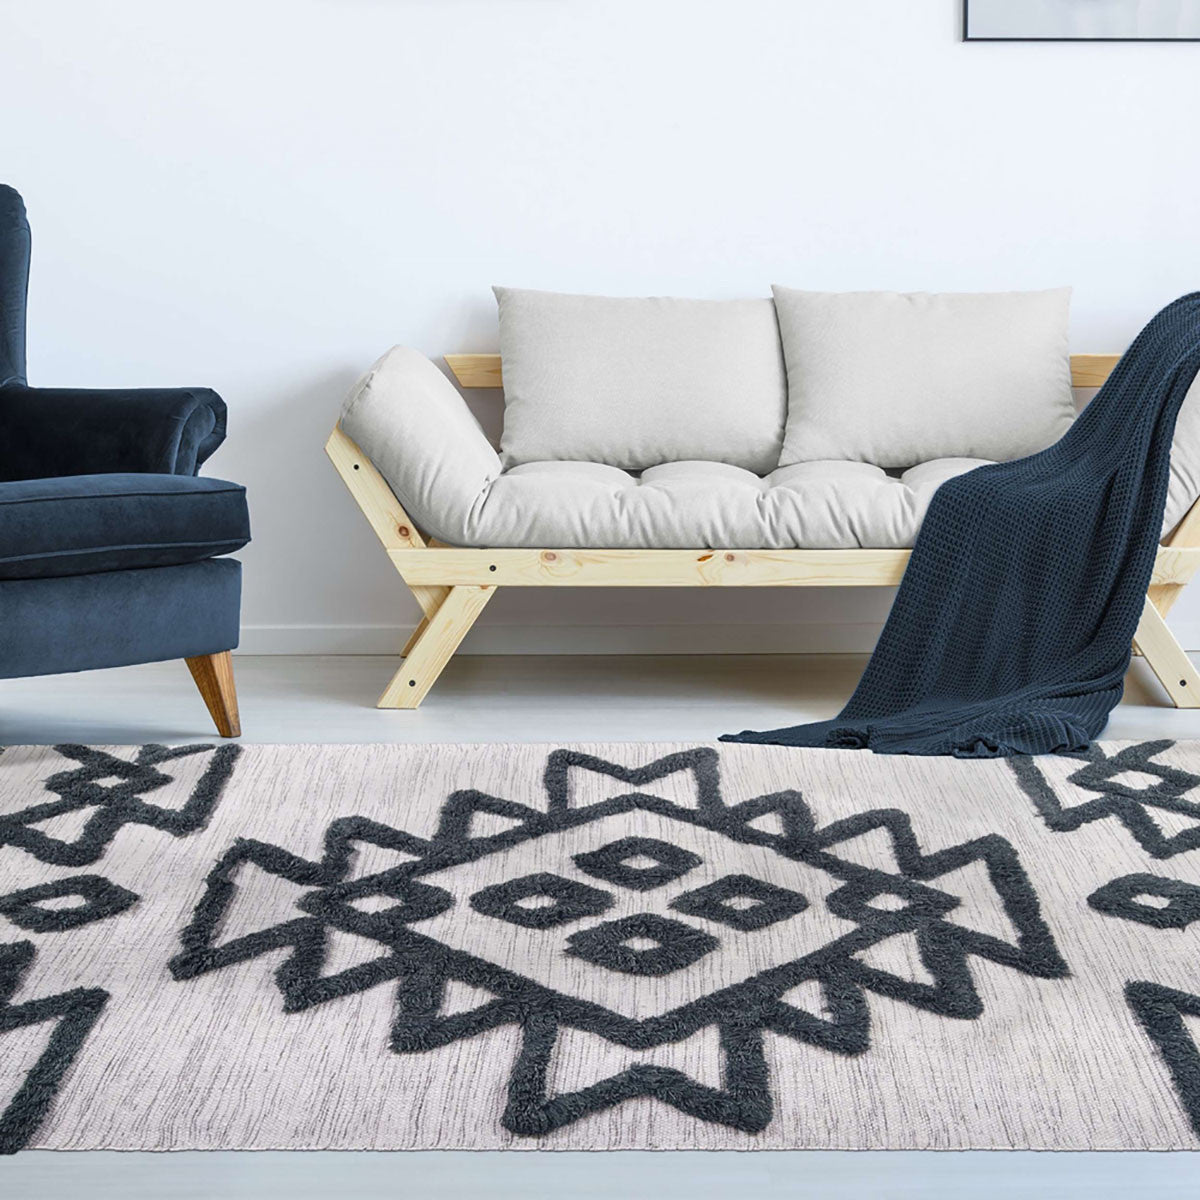 4' X 6' Ivory And Charcoal Wool Geometric Flatweave Handmade Stain Resistant Area Rug With Fringe